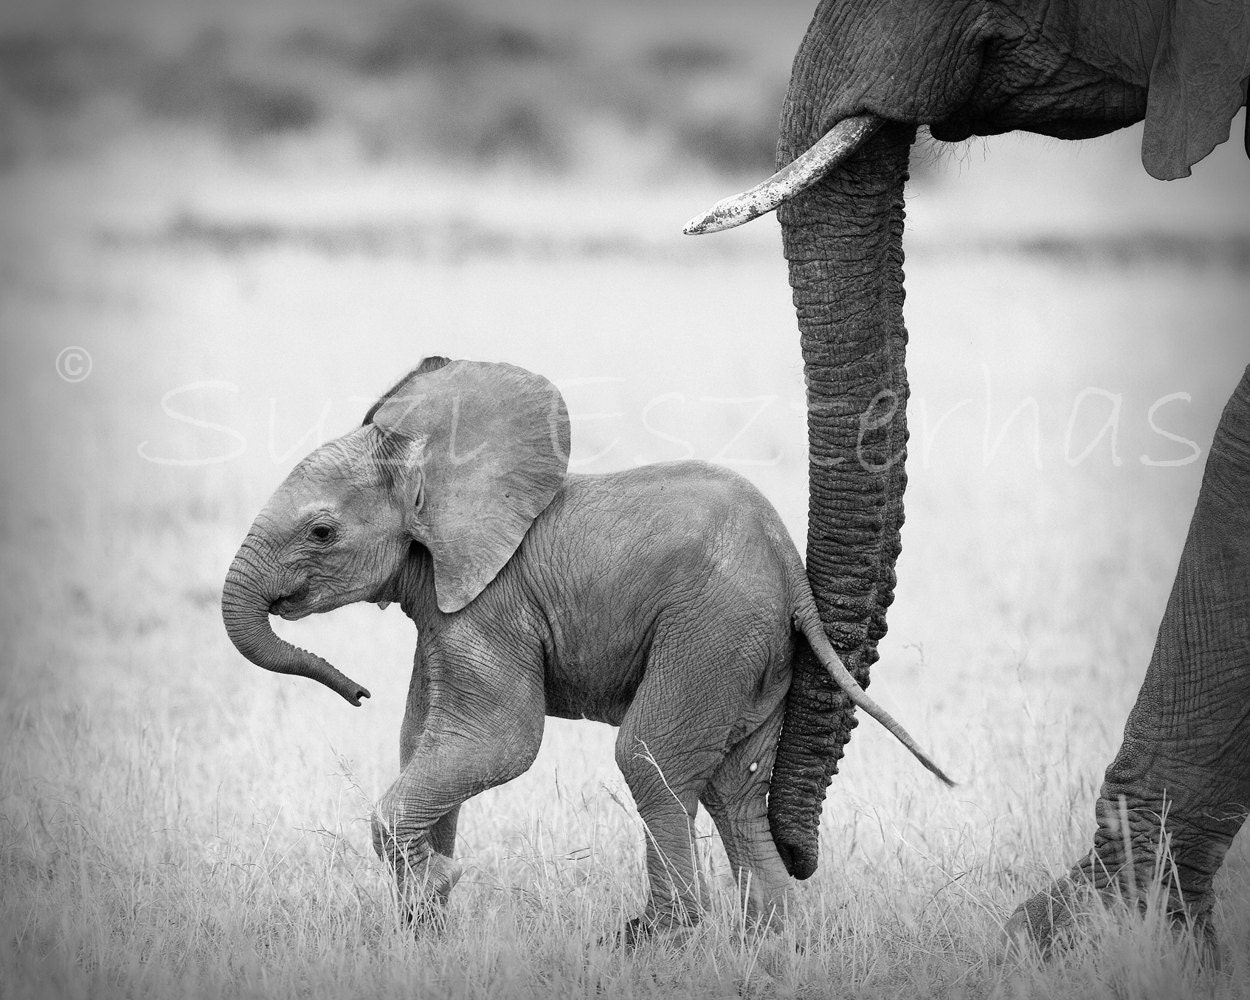 50% OFF SALE Baby Elephant Black and White Photo Print